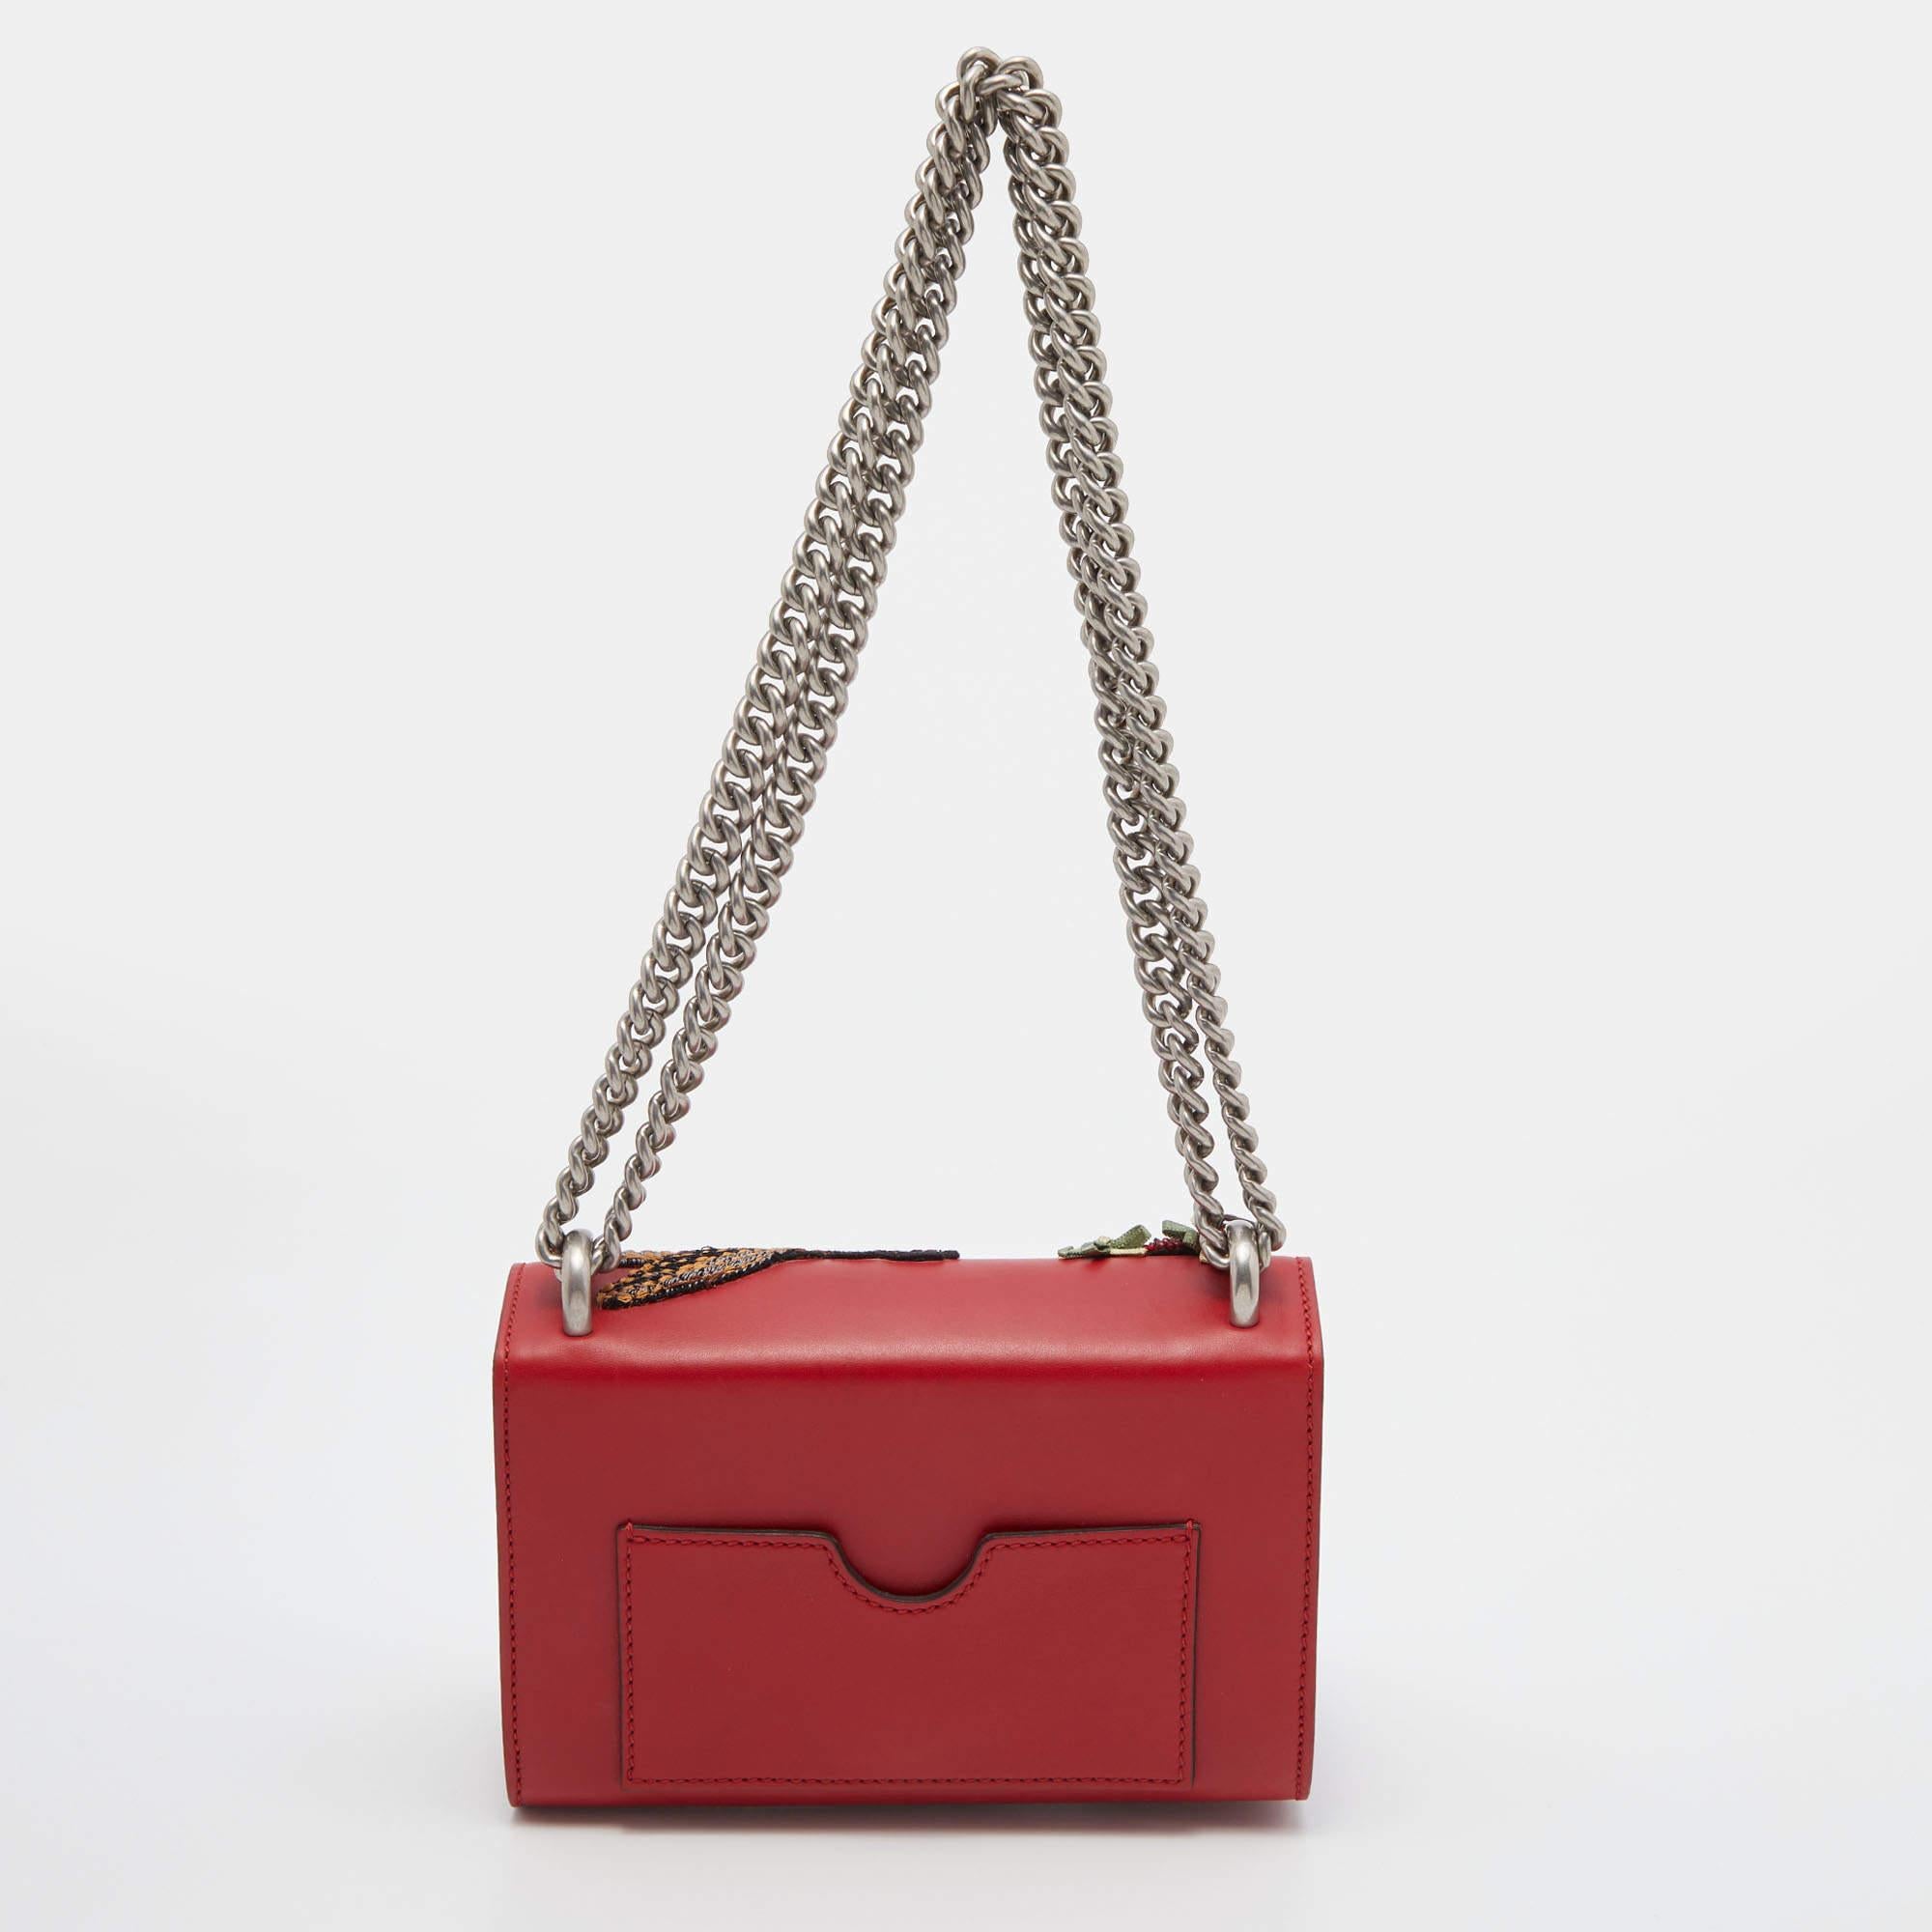 With a Gucci bag by your side, it's going to be a stylish OOTD, no matter the day. Here, we have this Gucci Padlock shoulder bag just for you. Its compact shape, minimal details, and simple elegance make it a worthy purchase and a versatile